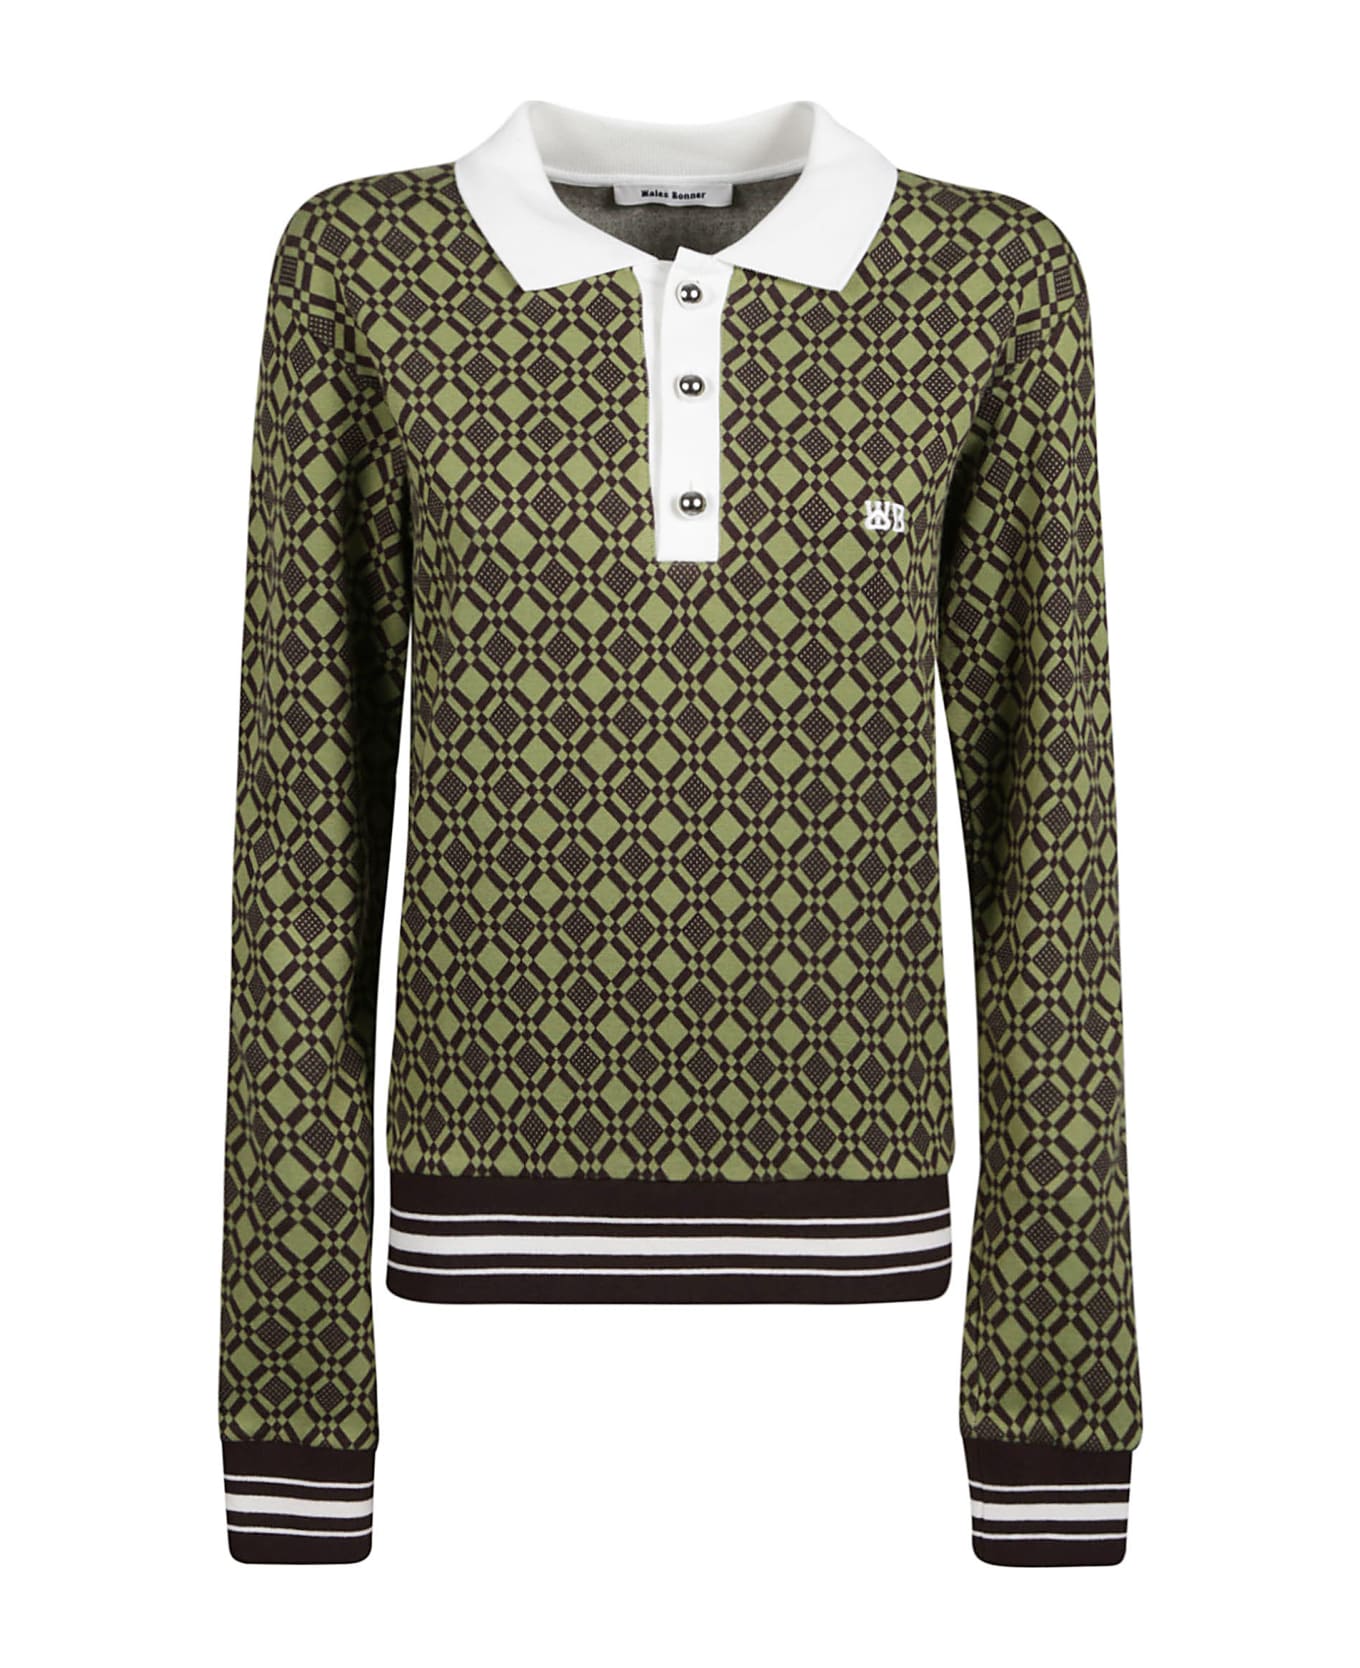 Wales Bonner Cotton Jaquard Power Top - Olive Green